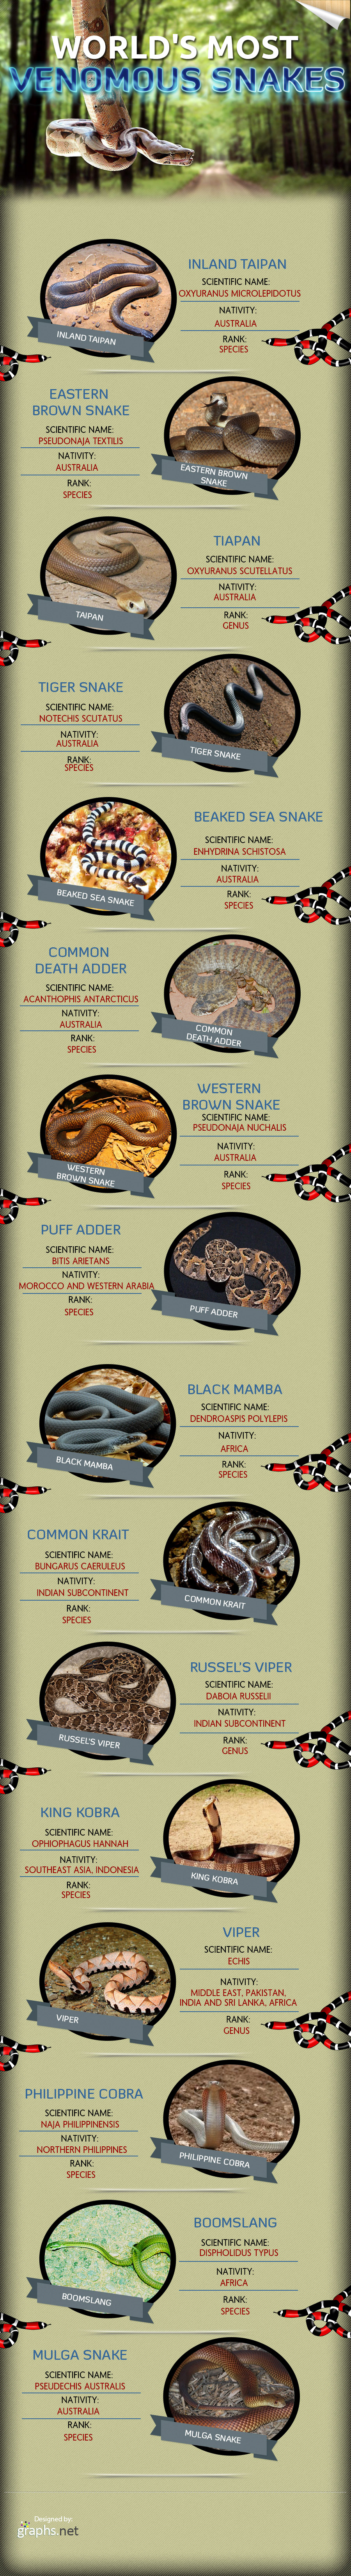 Most Venomous Snakes in the World